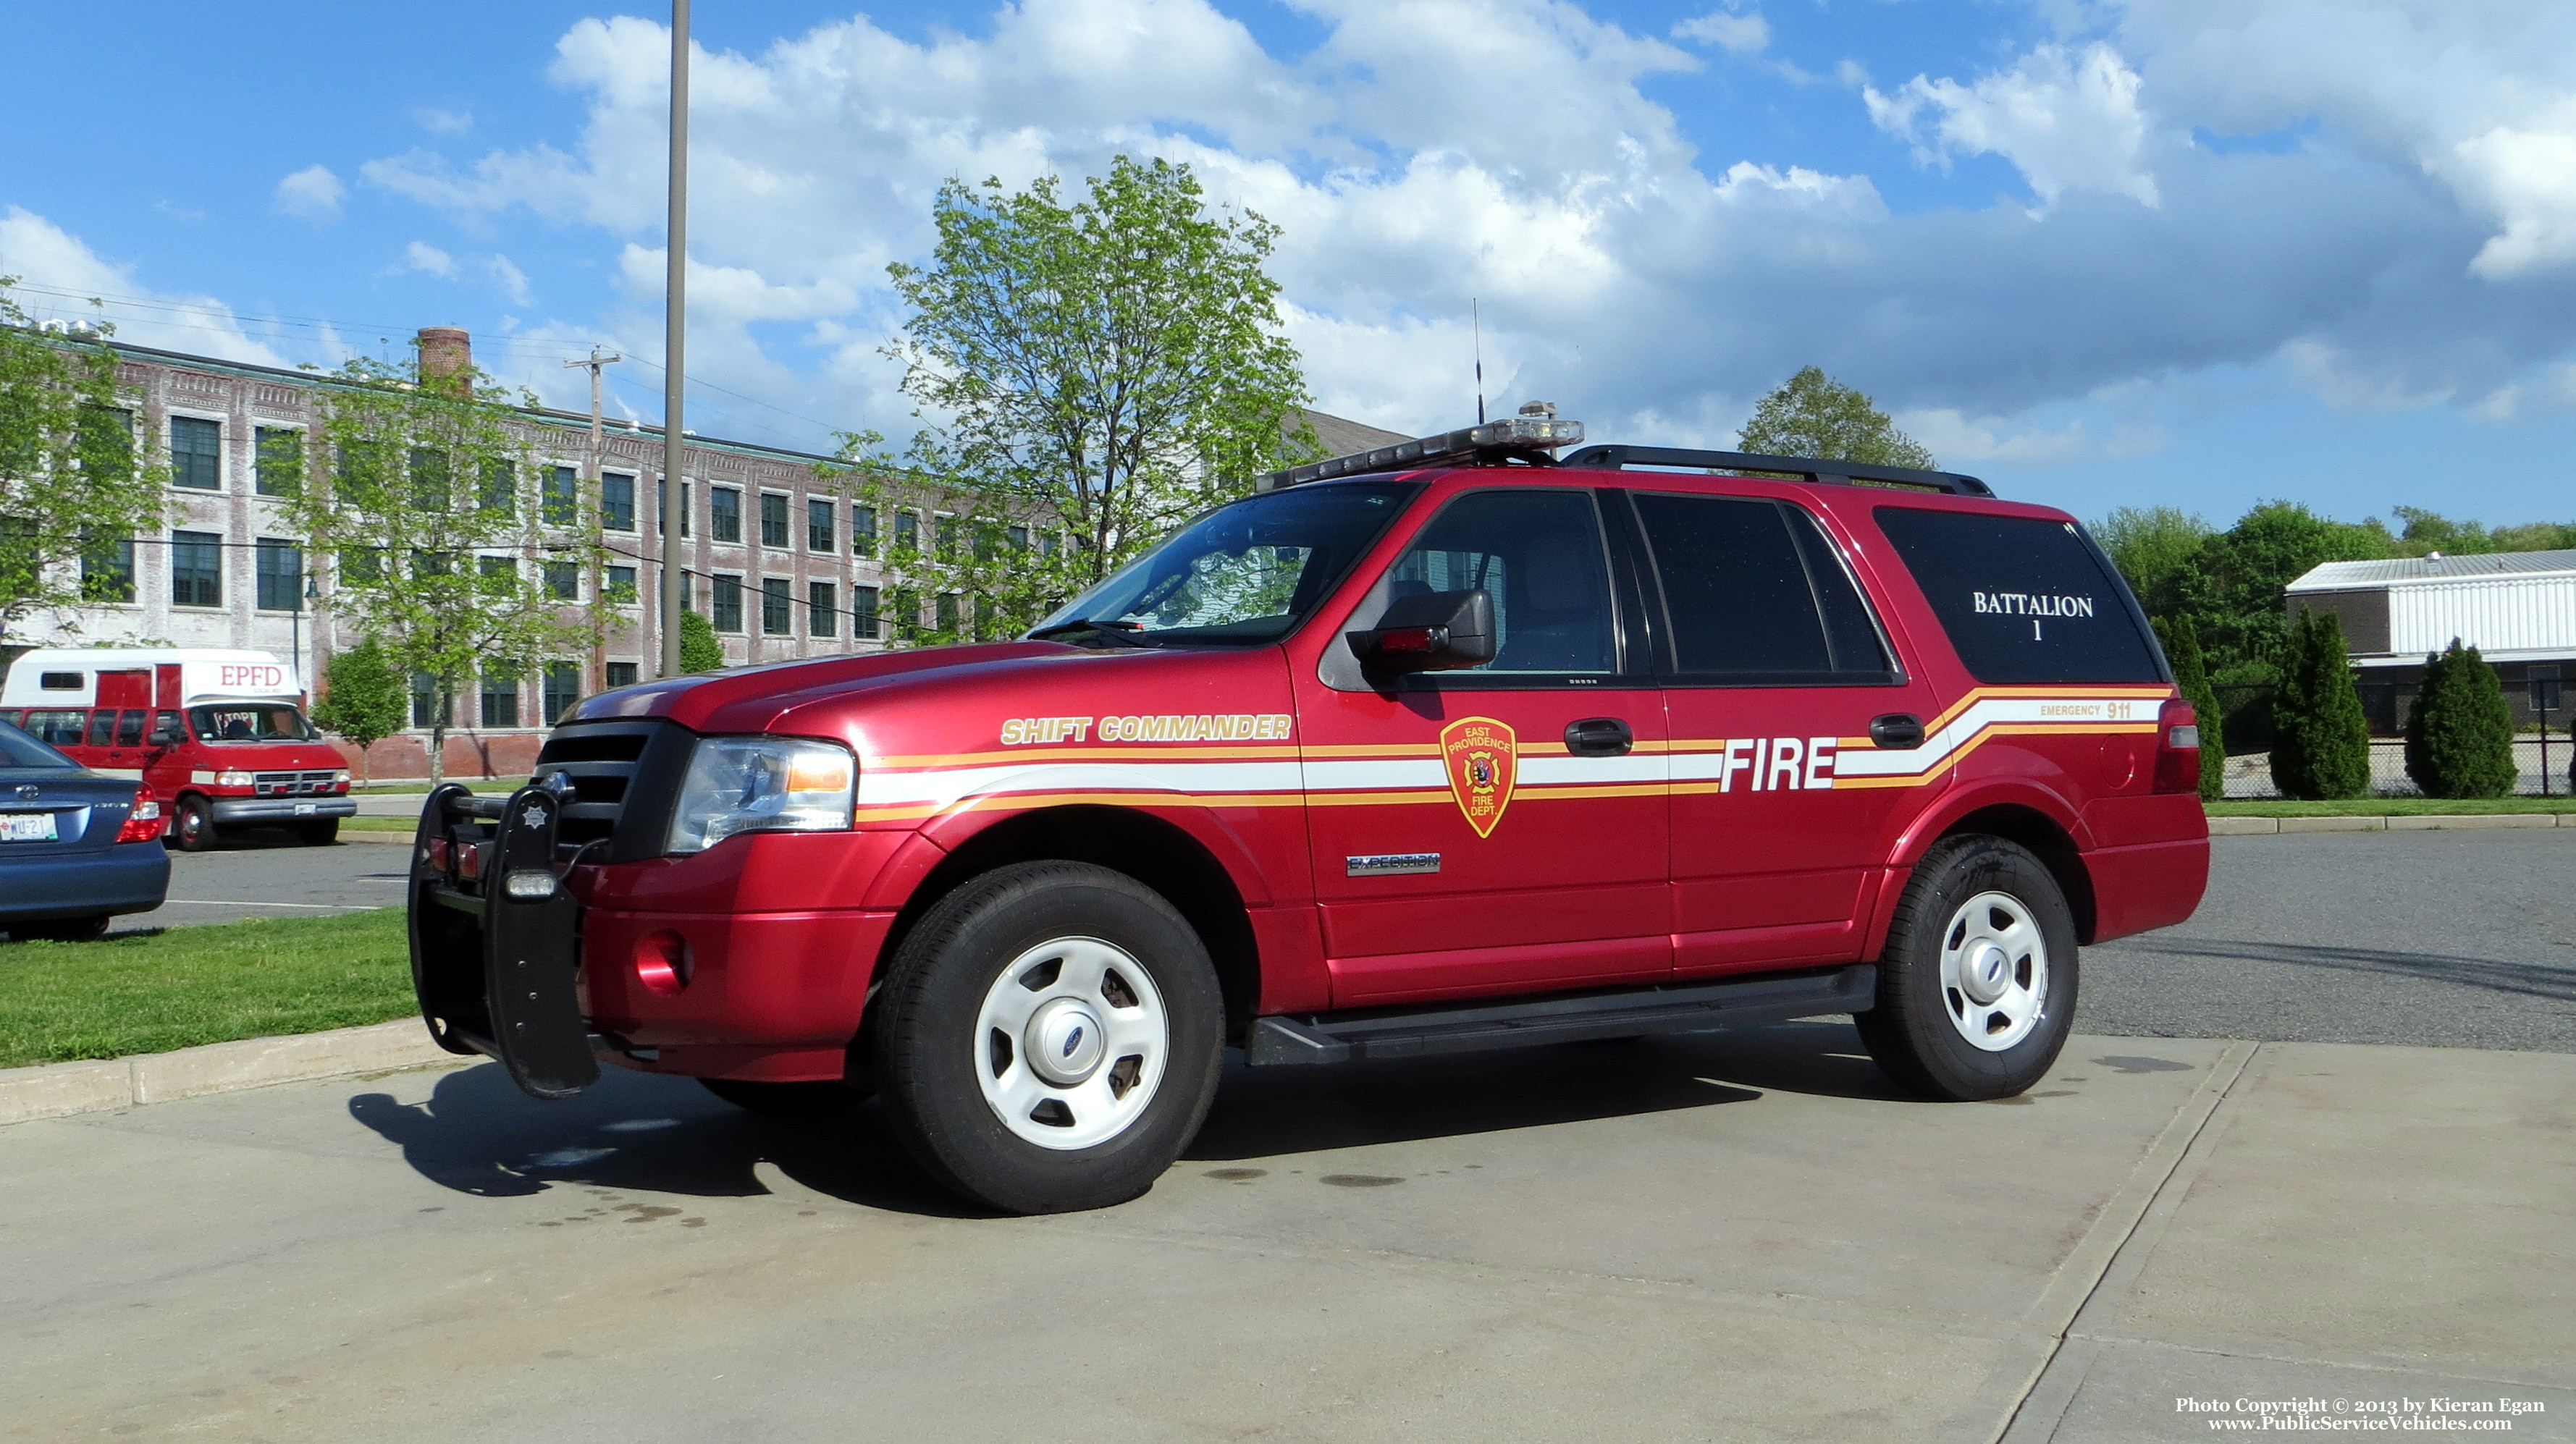 A photo  of East Providence Fire
            Battalion Chief 1, a 2008 Ford Expedition XLT             taken by Kieran Egan